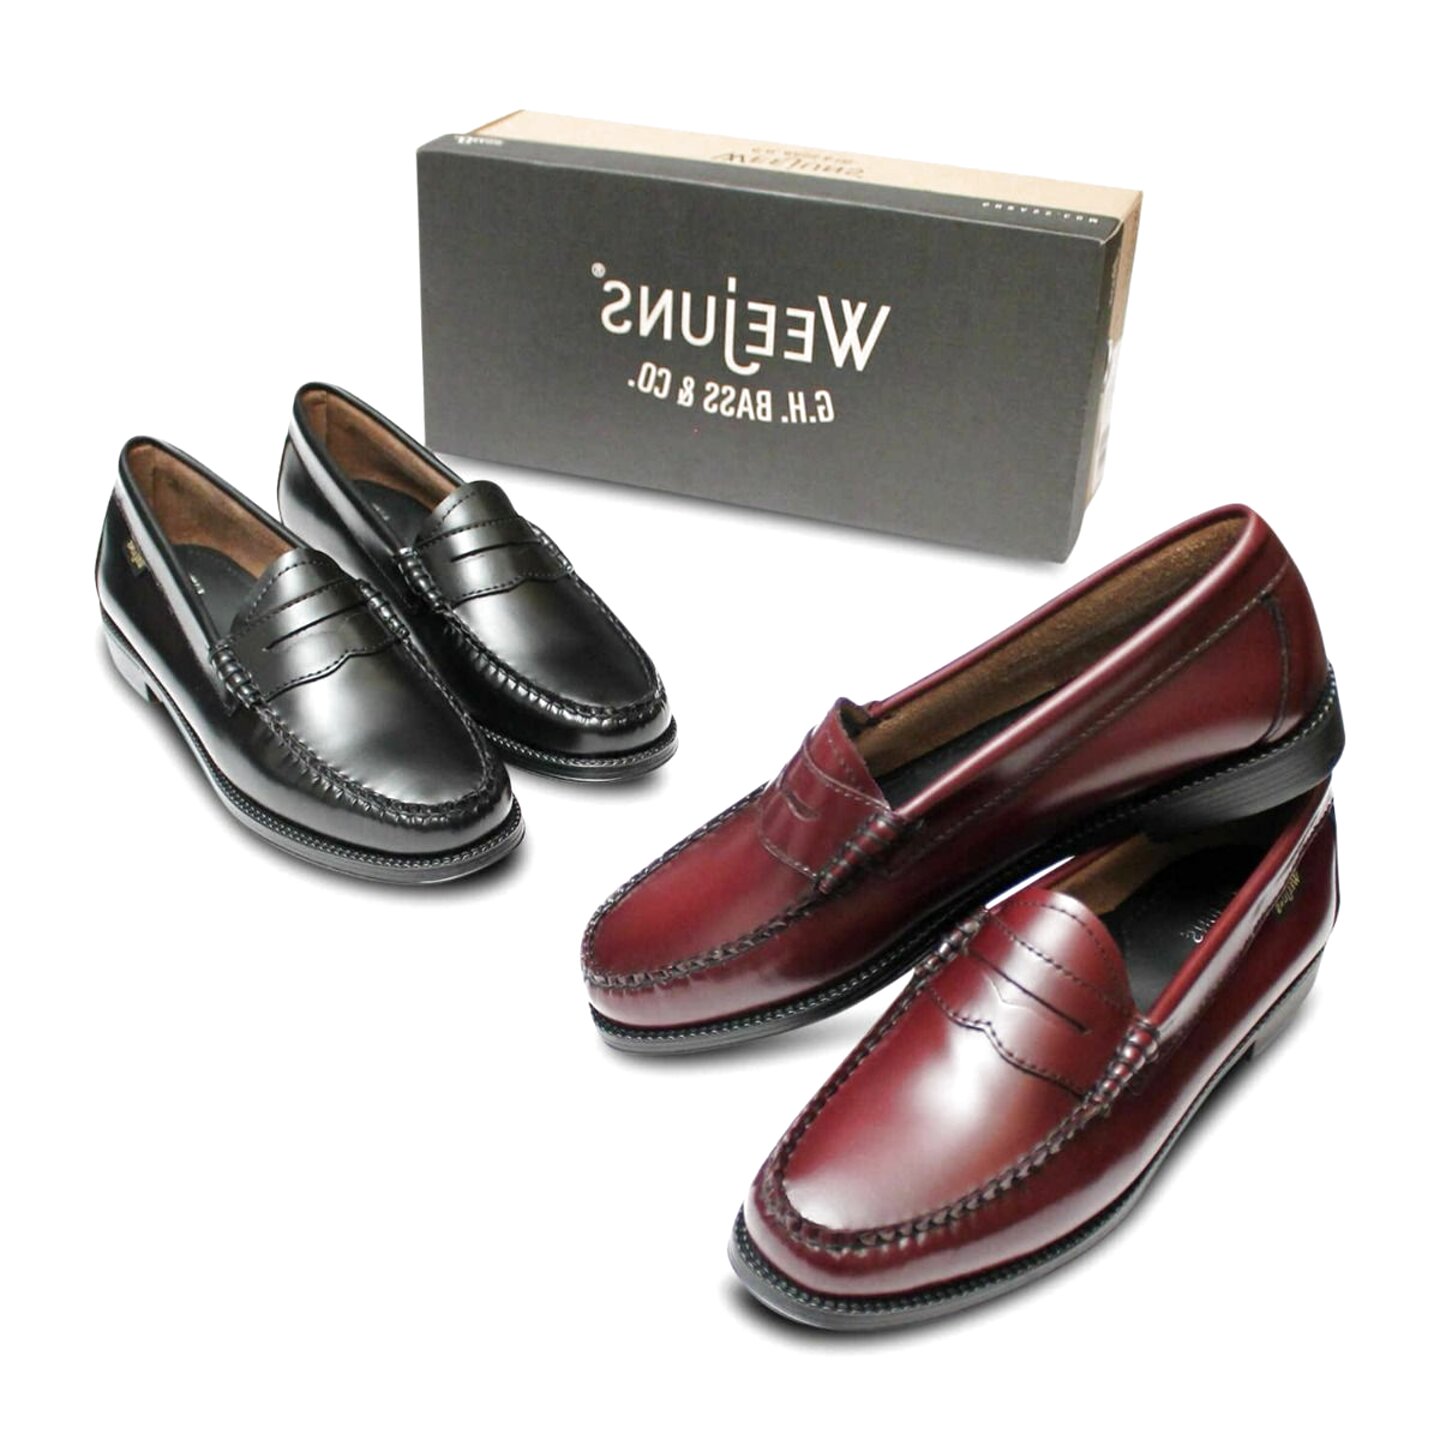 Bass Weejun Loafers for sale in UK | 59 used Bass Weejun Loafers